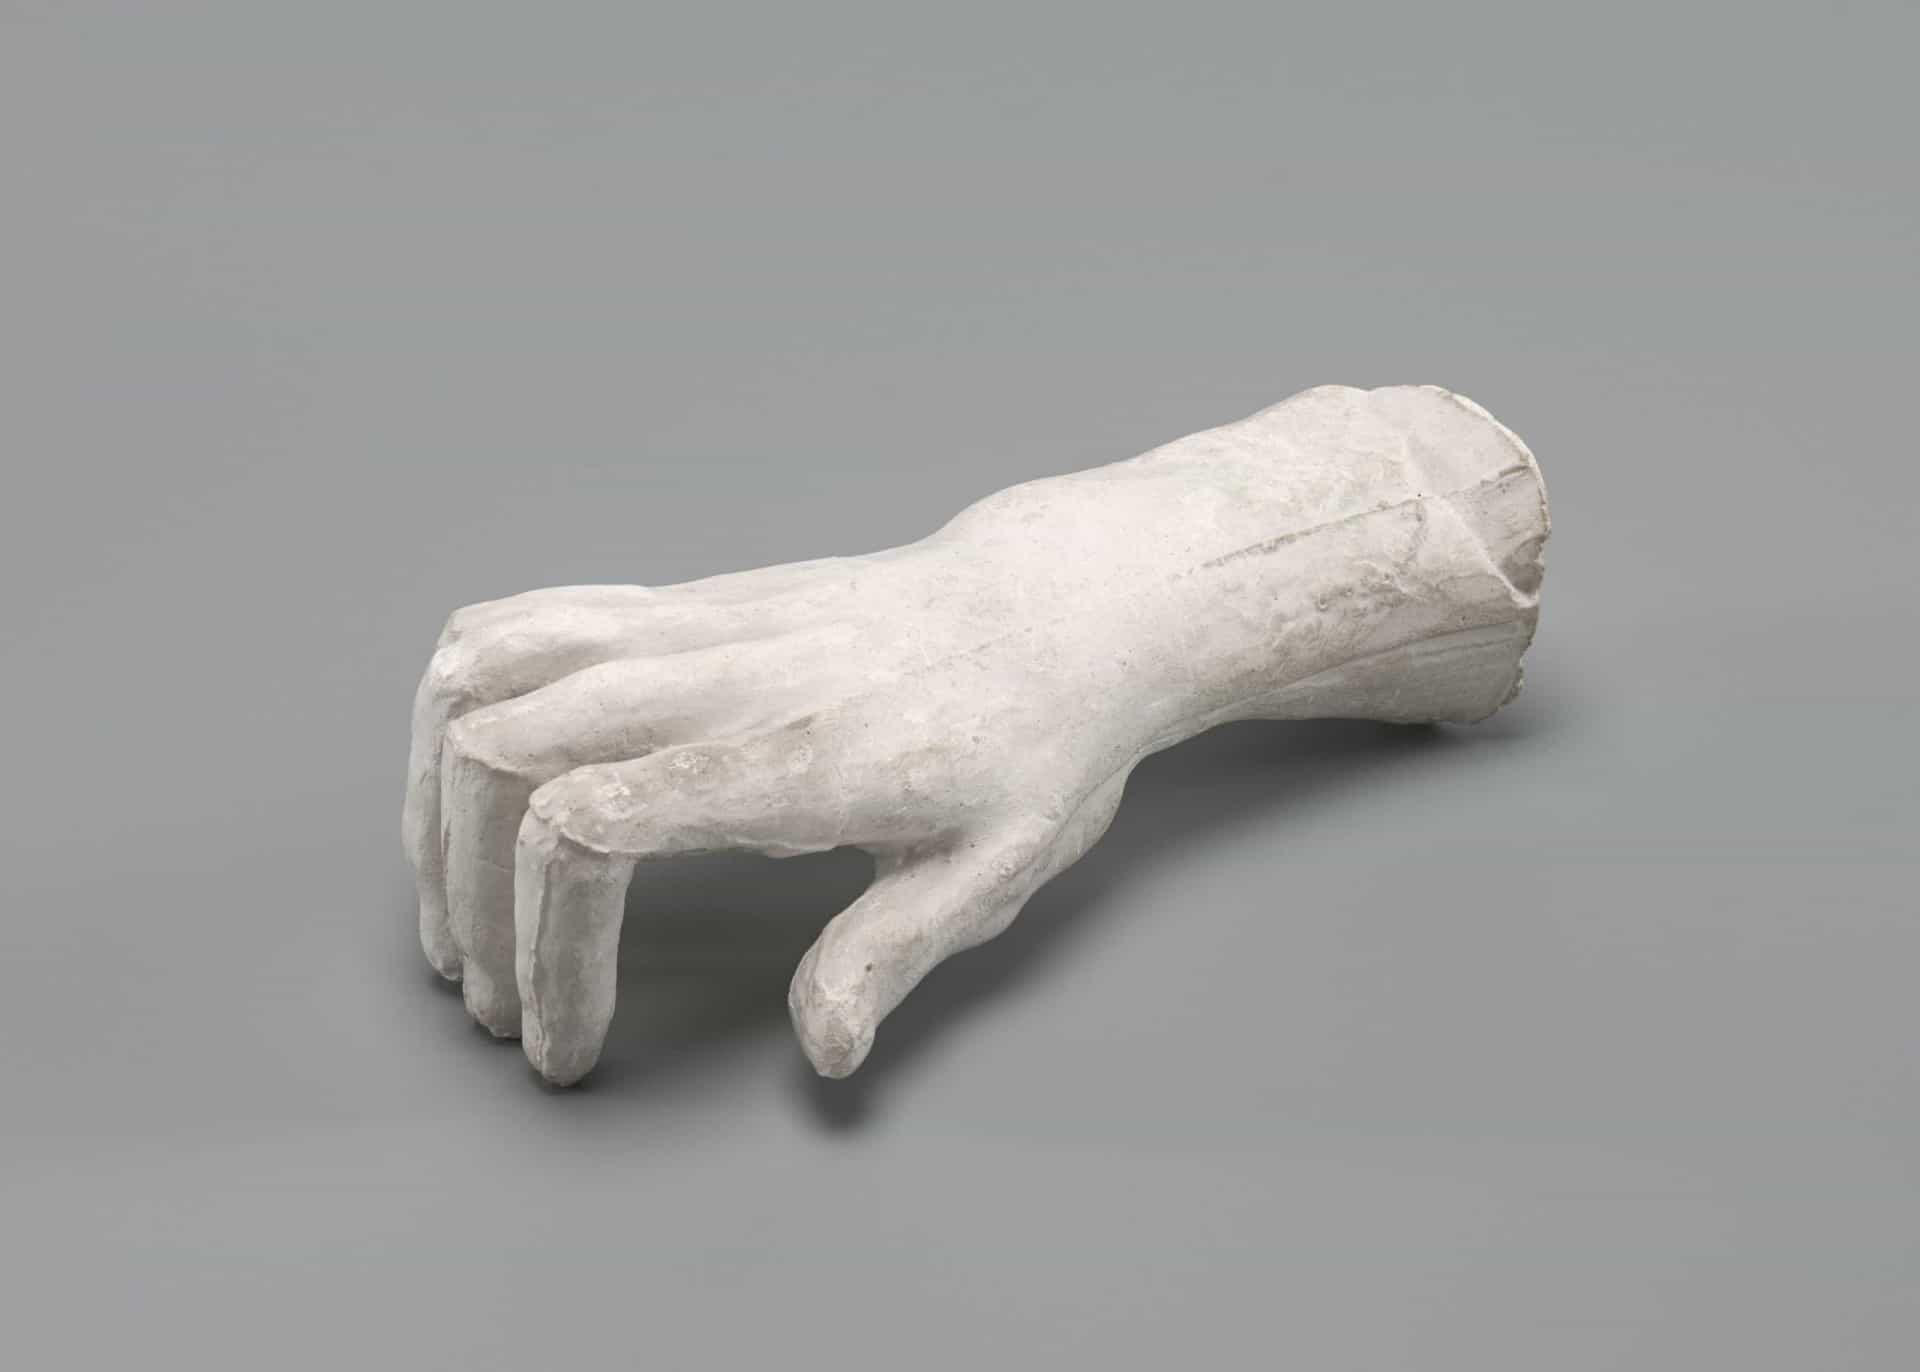 <p>When Prince Albert died, Queen Victoria was struck with extreme grief and was unable to accept his death. She insisted that his servants continue performing his morning ritual every day, bringing his shaving kit and clothes to his room, and removing the unused items in the evening. She had a plaster cast of his hand made and slept with it every night.</p>